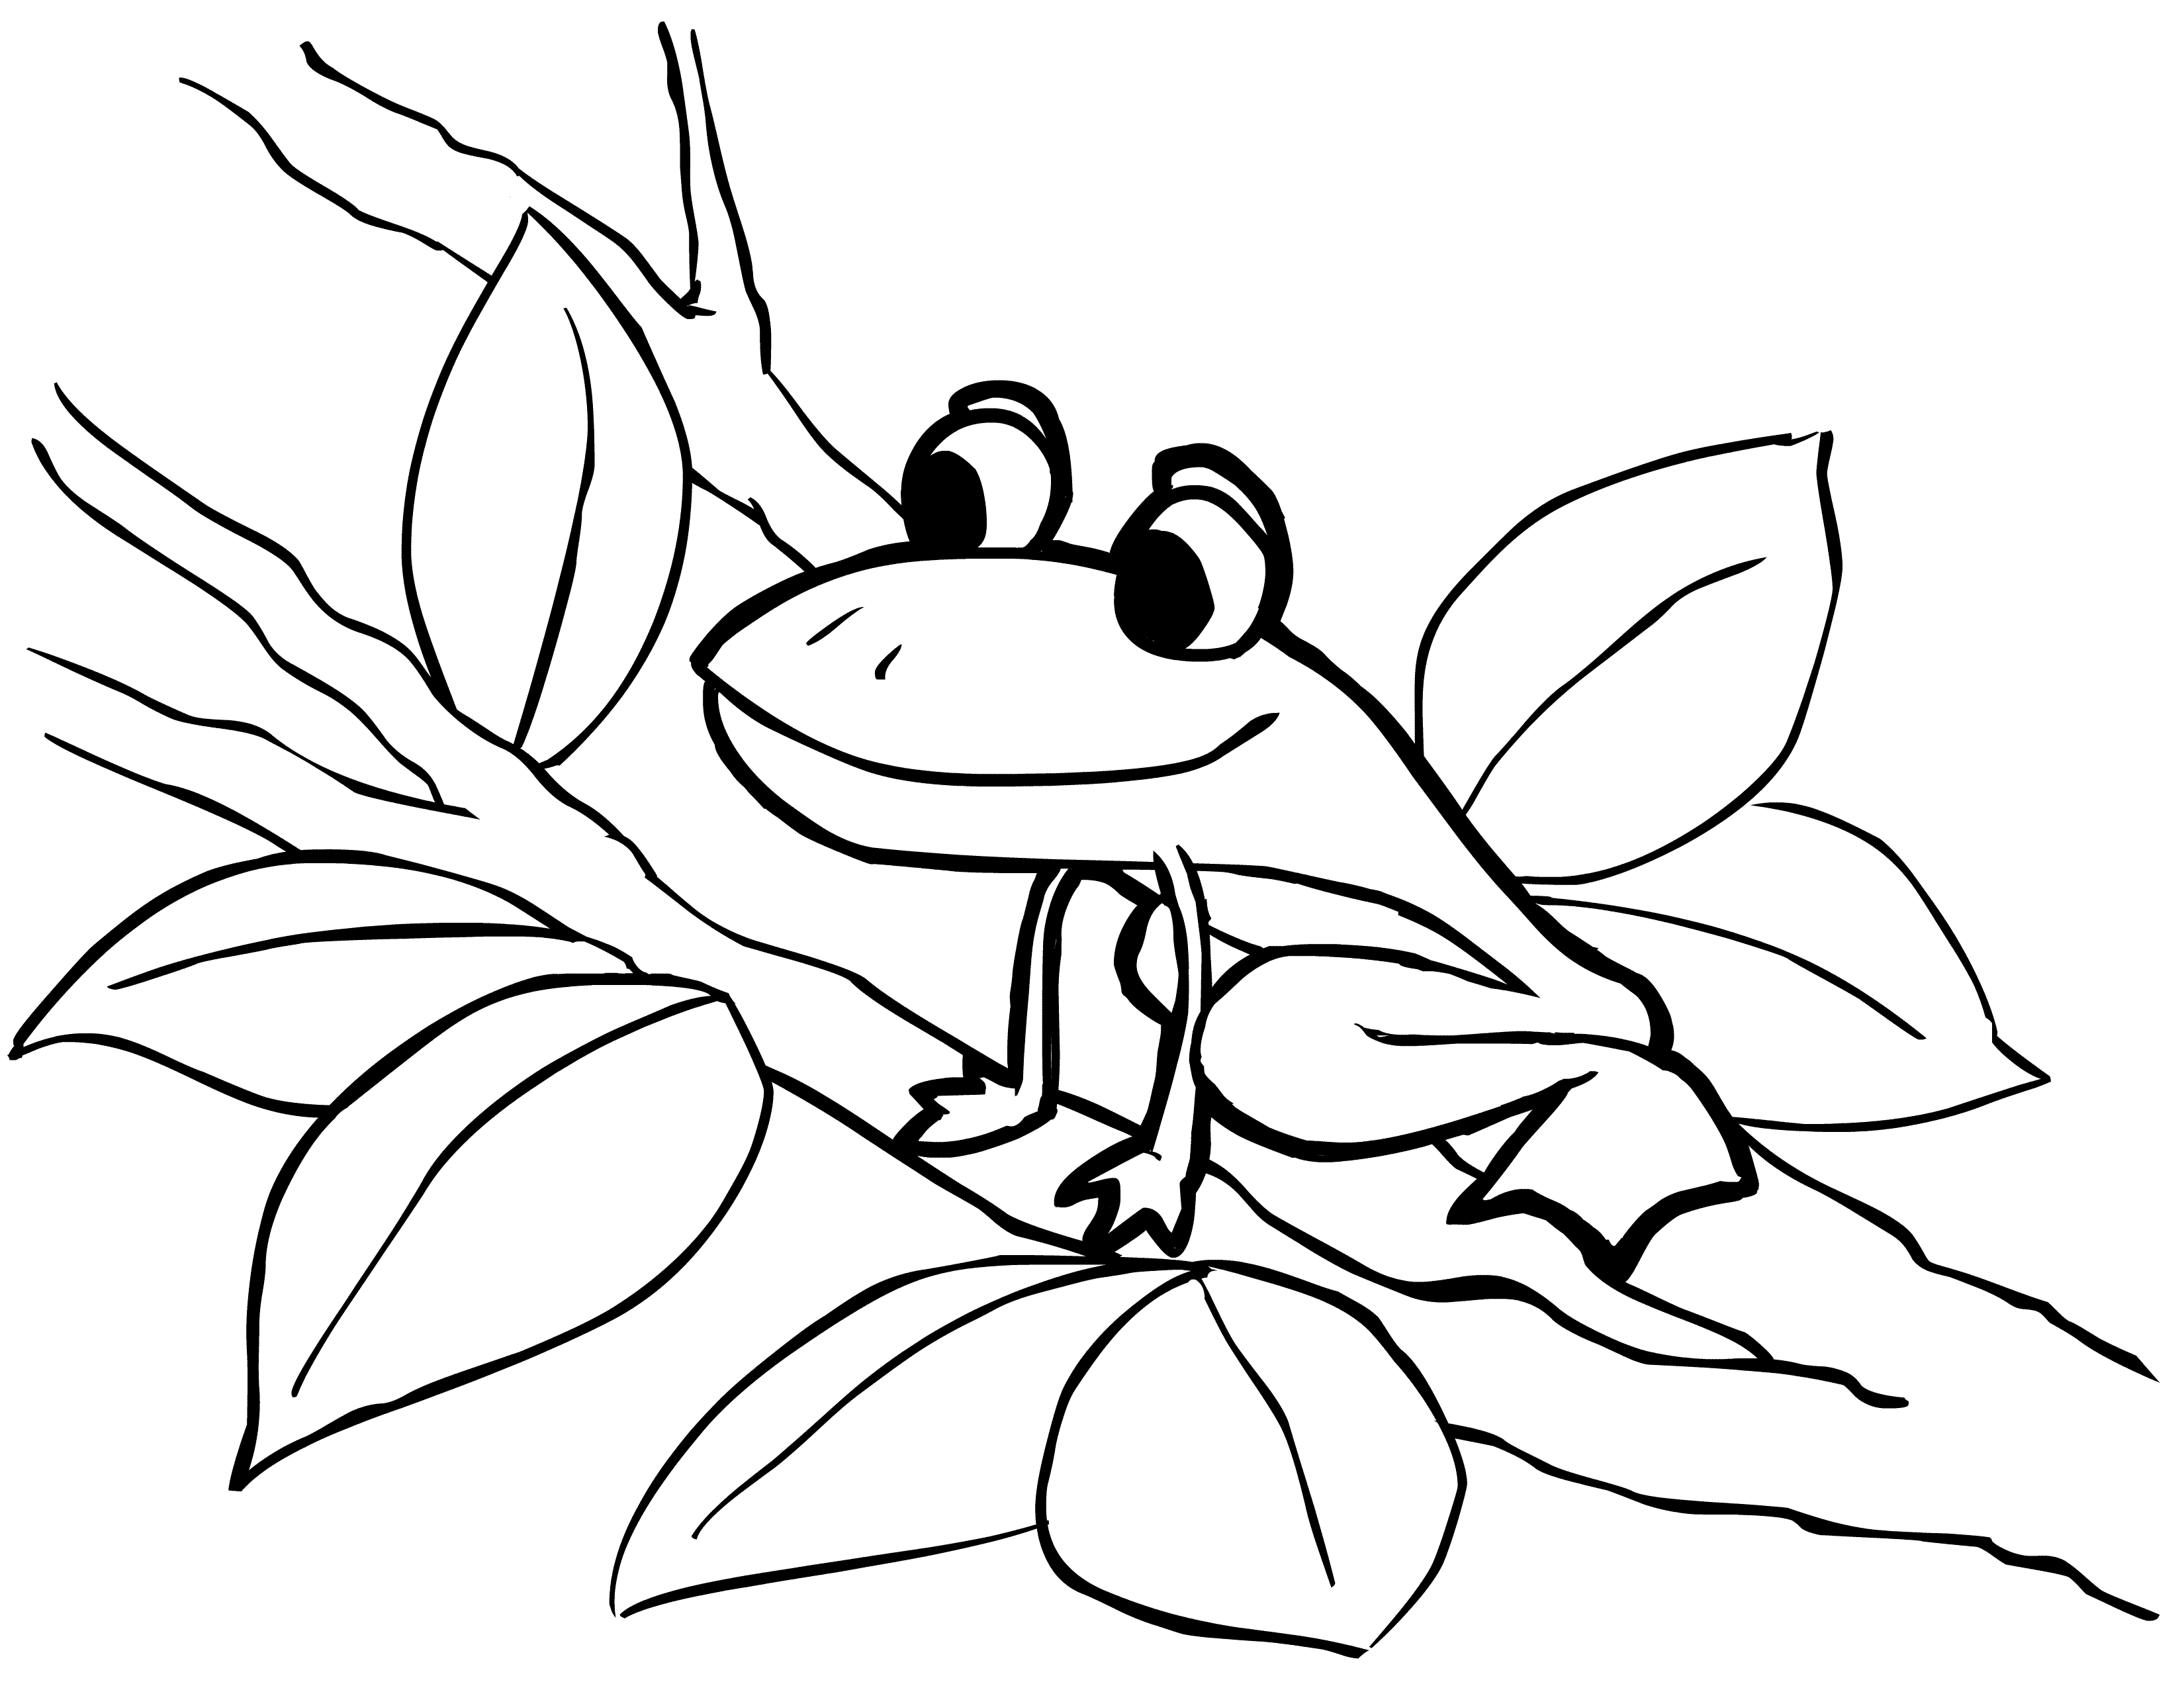 Coloring Pages of Frogs